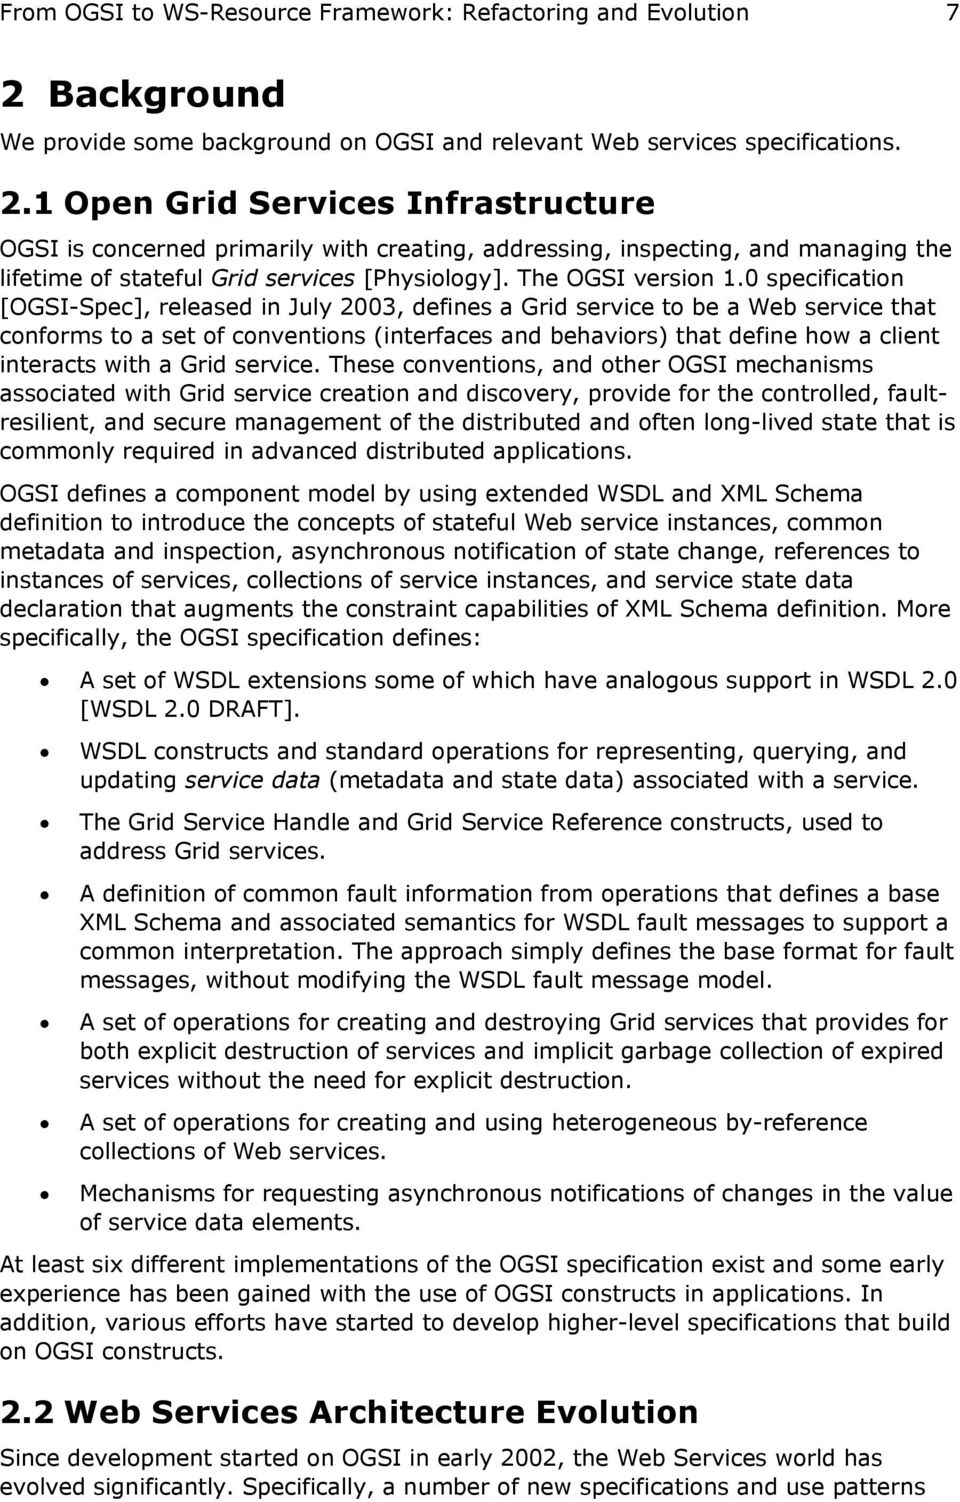 1 Open Grid Services Infrastructure OGSI is concerned primarily with creating, addressing, inspecting, and managing the lifetime of stateful Grid services [Physiology]. The OGSI version 1.